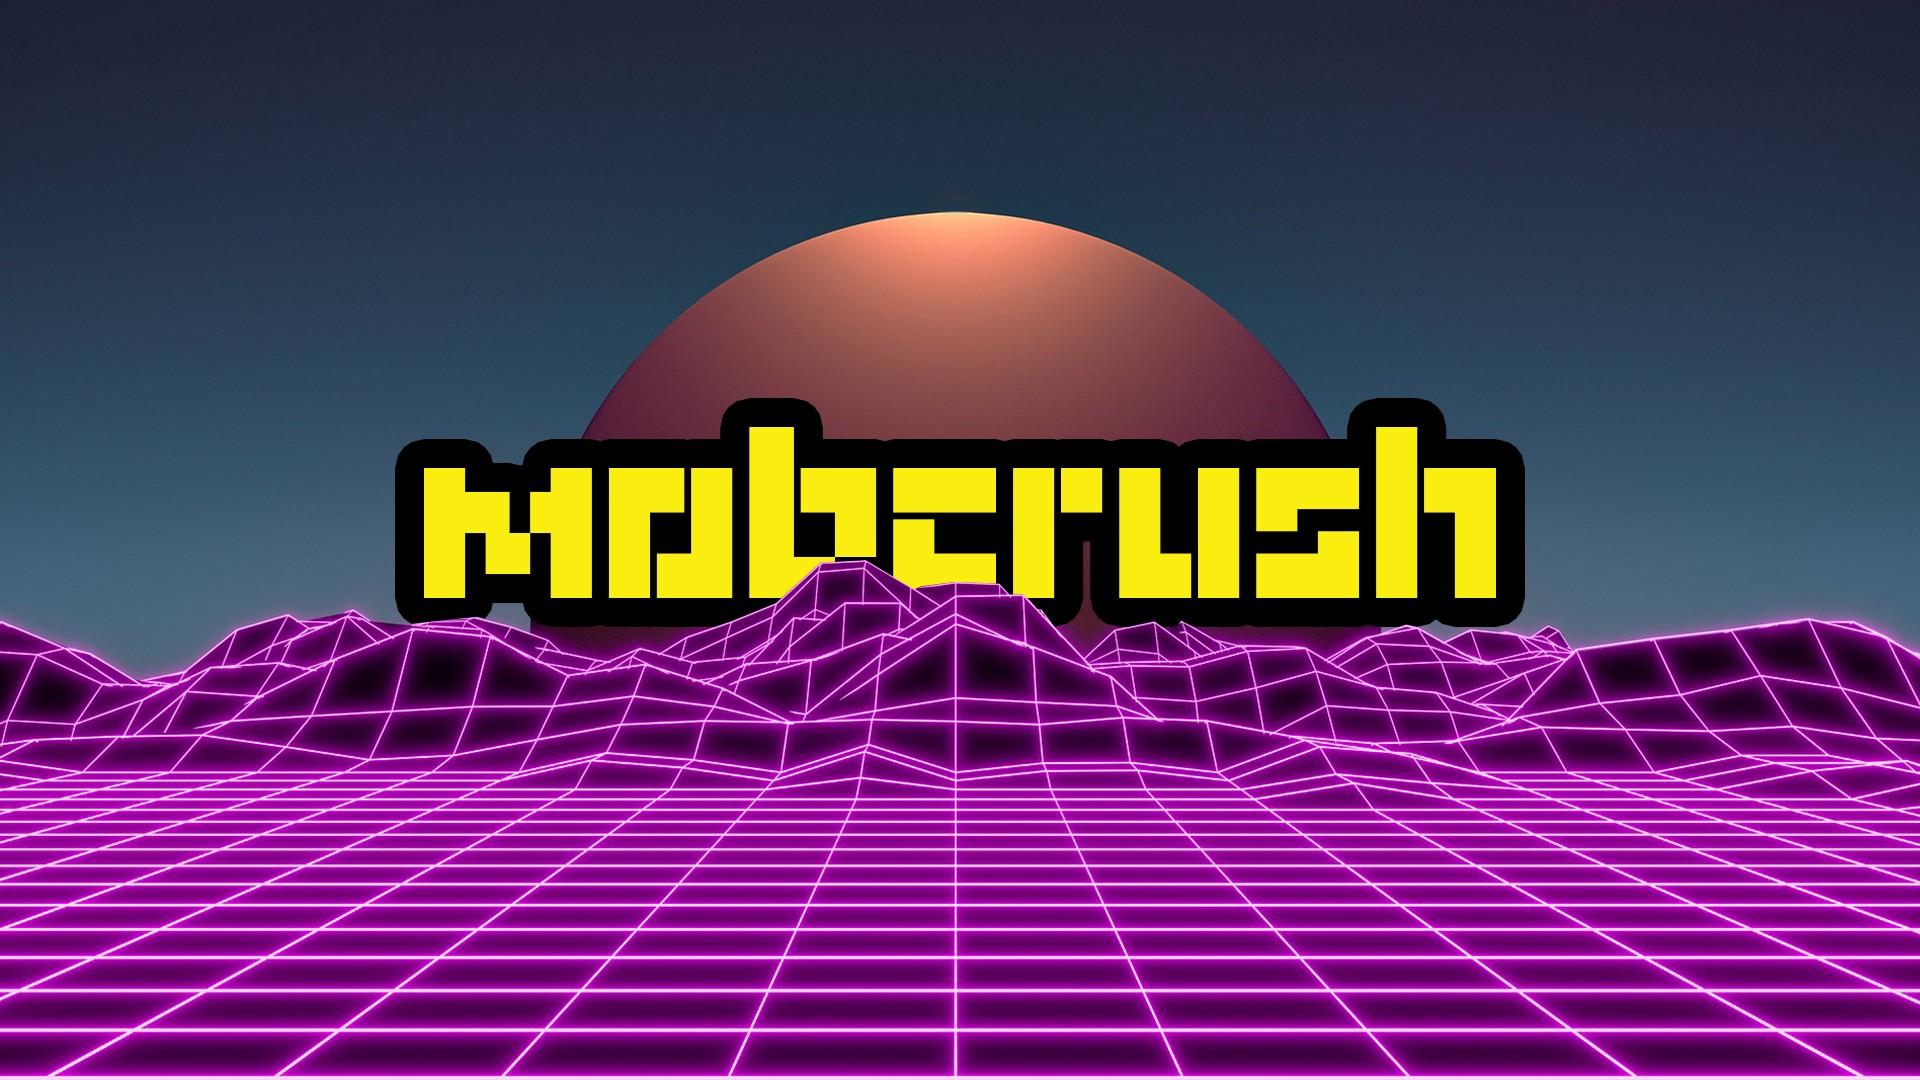 Mobcrush Logo - What's up with Mobcrush in 2018?